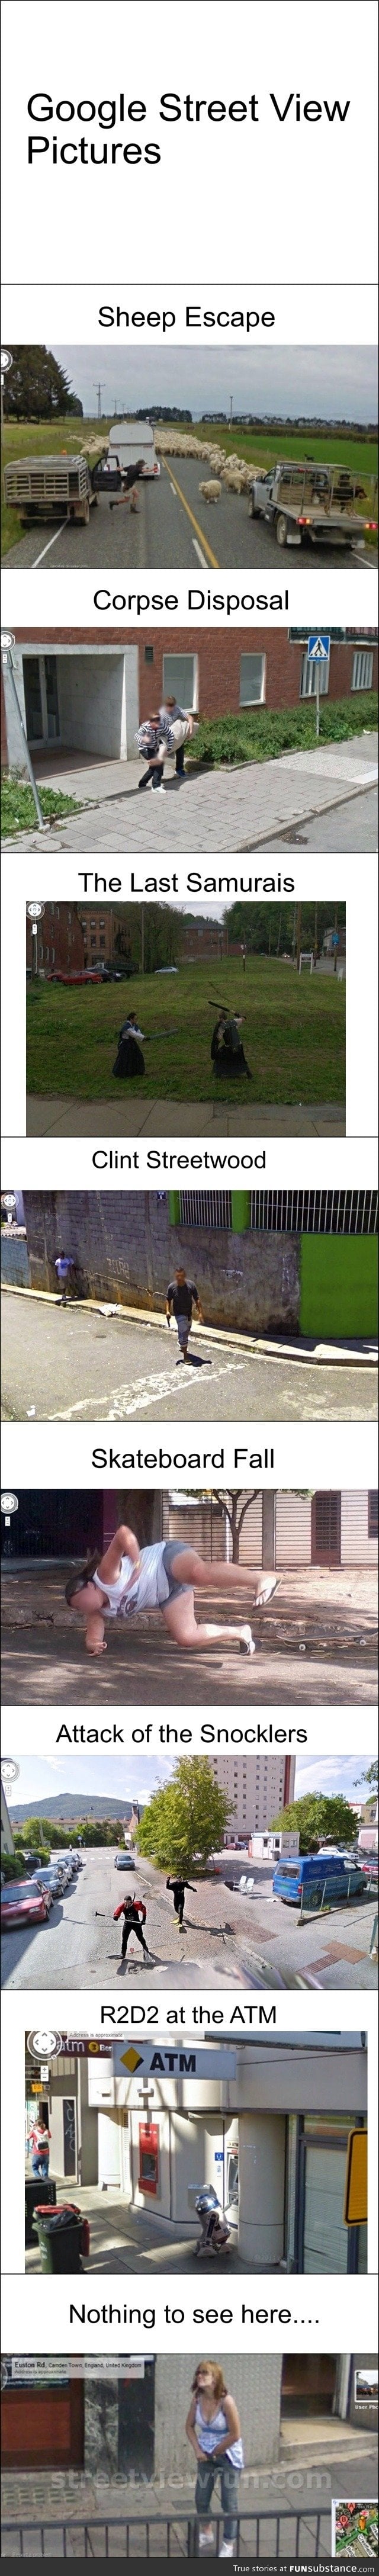 Google street view pictures